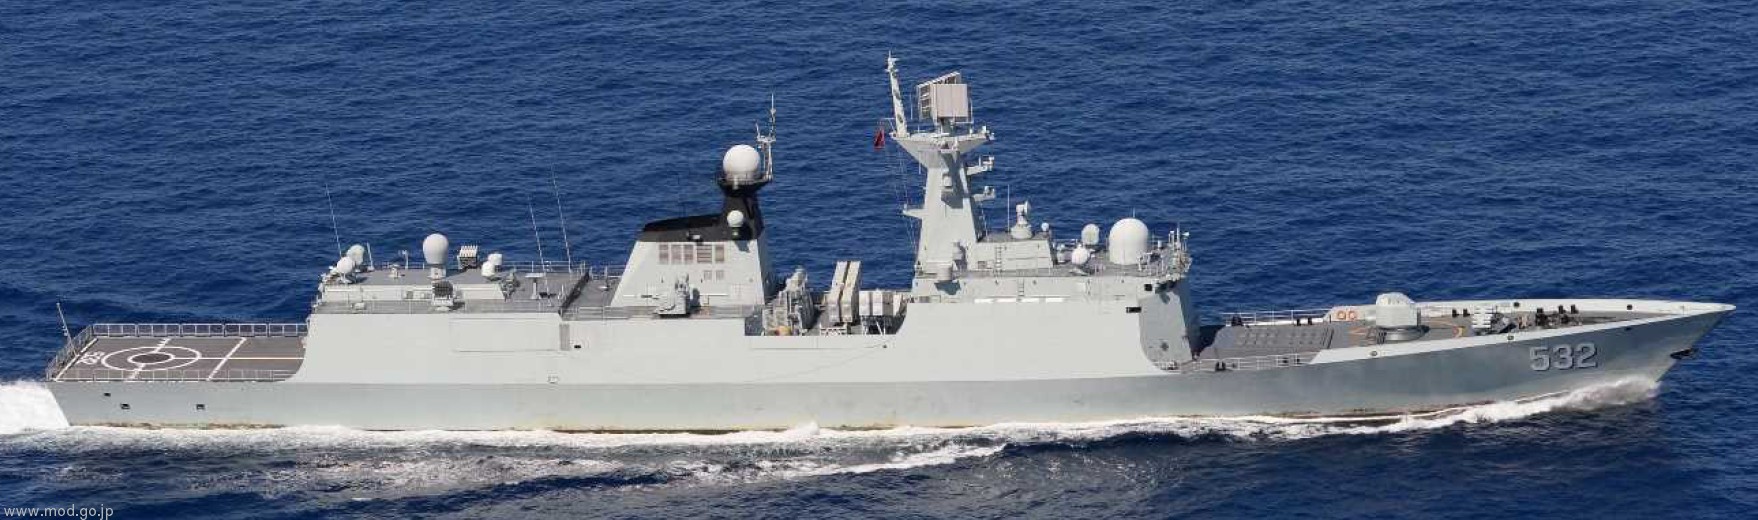 ffg-532 plans jingzhou type 054a jiangkai ii class guided missile frigate china people's liberation army navy 02